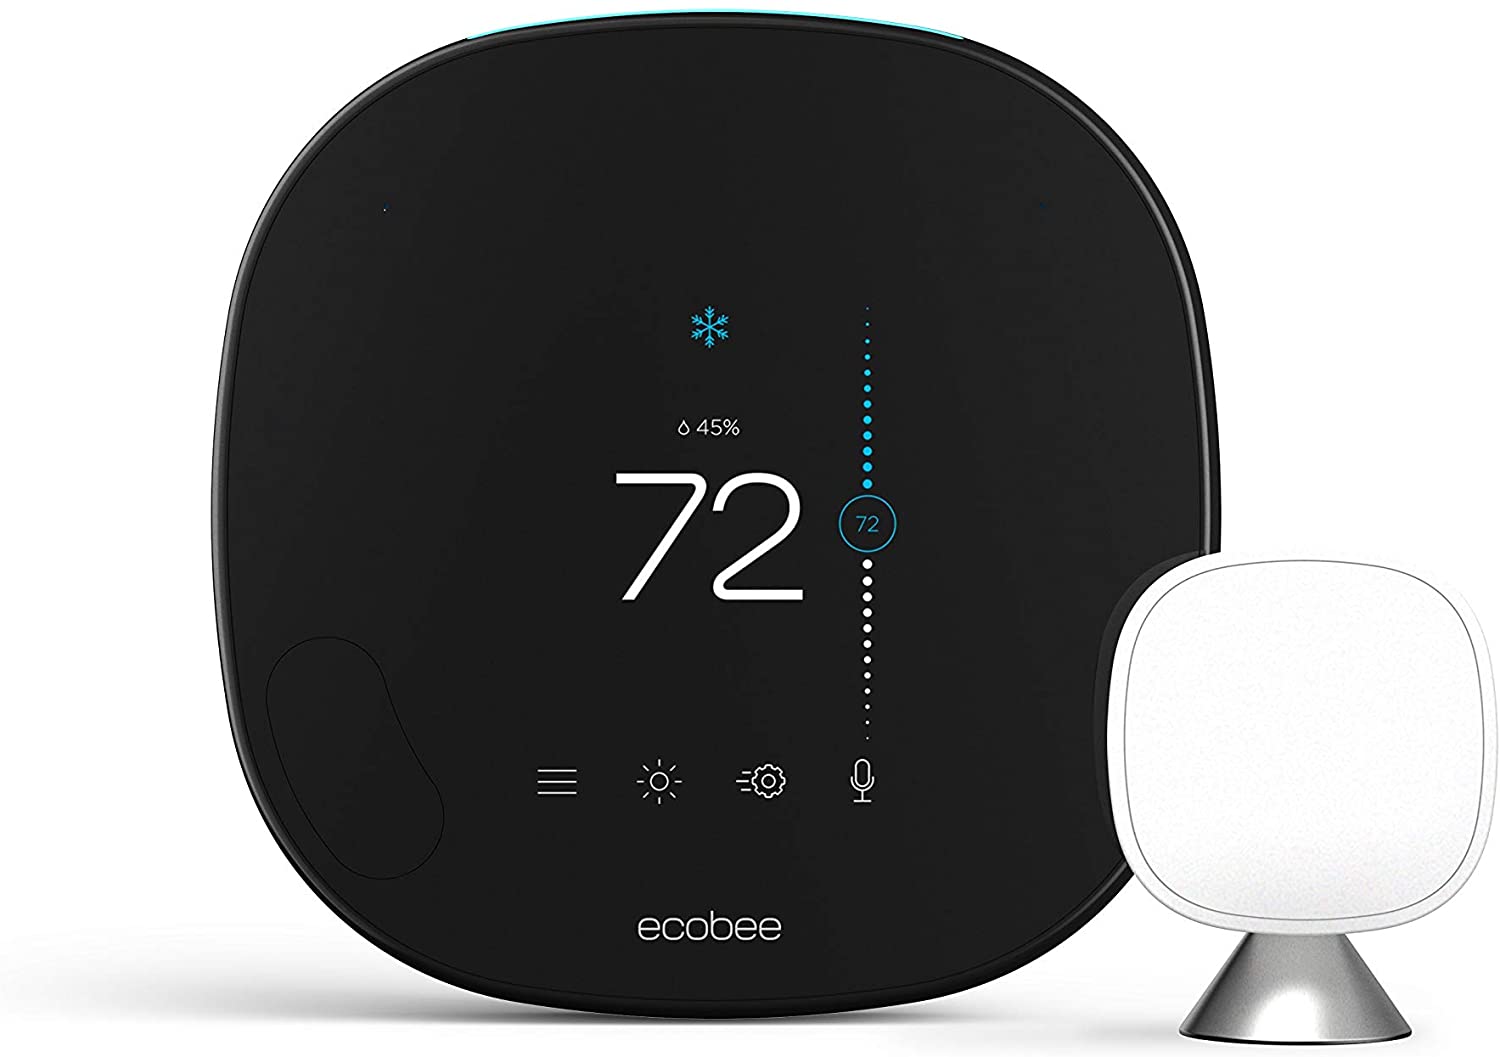 Best Smart Thermostat for Multiple Zones